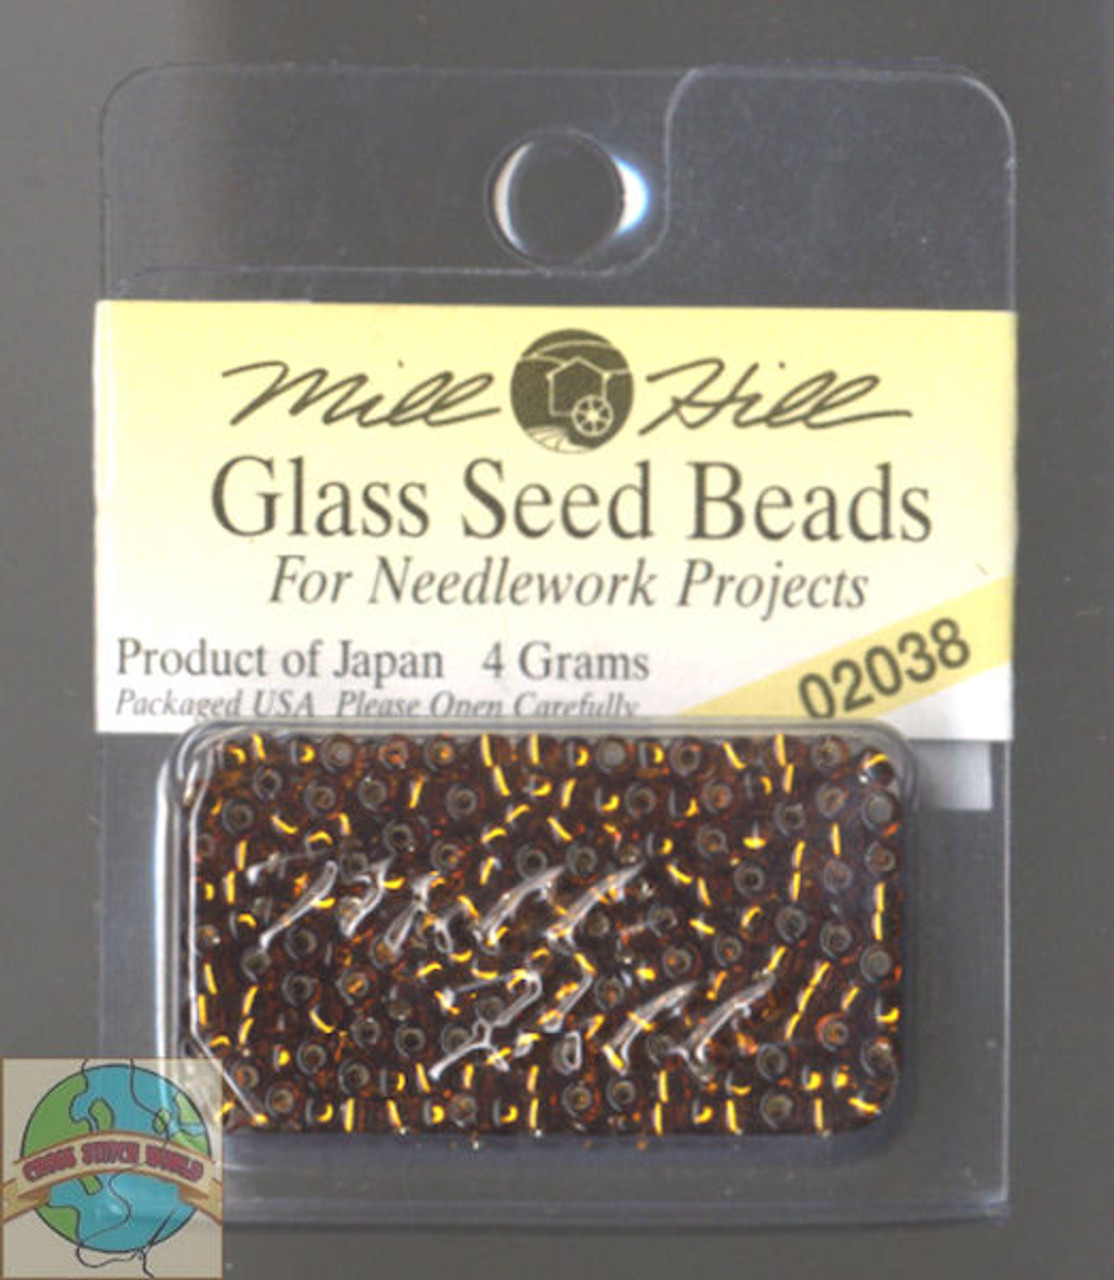 Mill Hill Glass Seed Beads 4g Brilliant Copper #02038